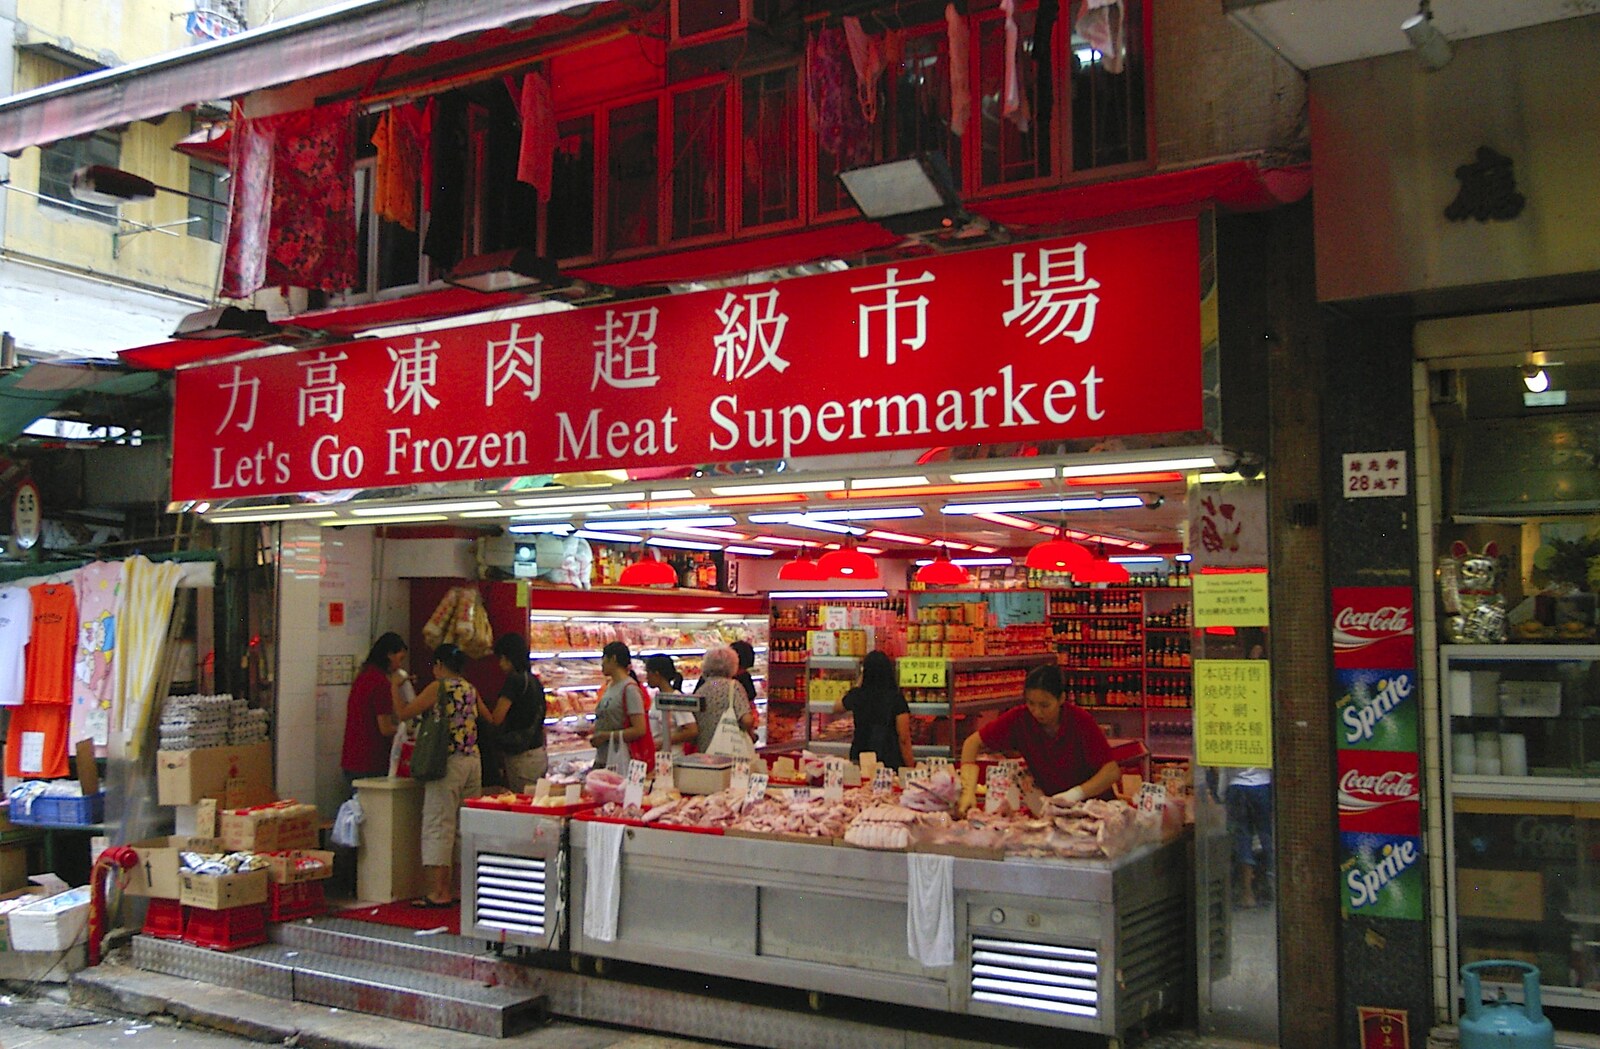 The Let's Go Frozen Meat Supermarket from Lan Kwai Fong Market, Hong Kong, China - 4th October 2006